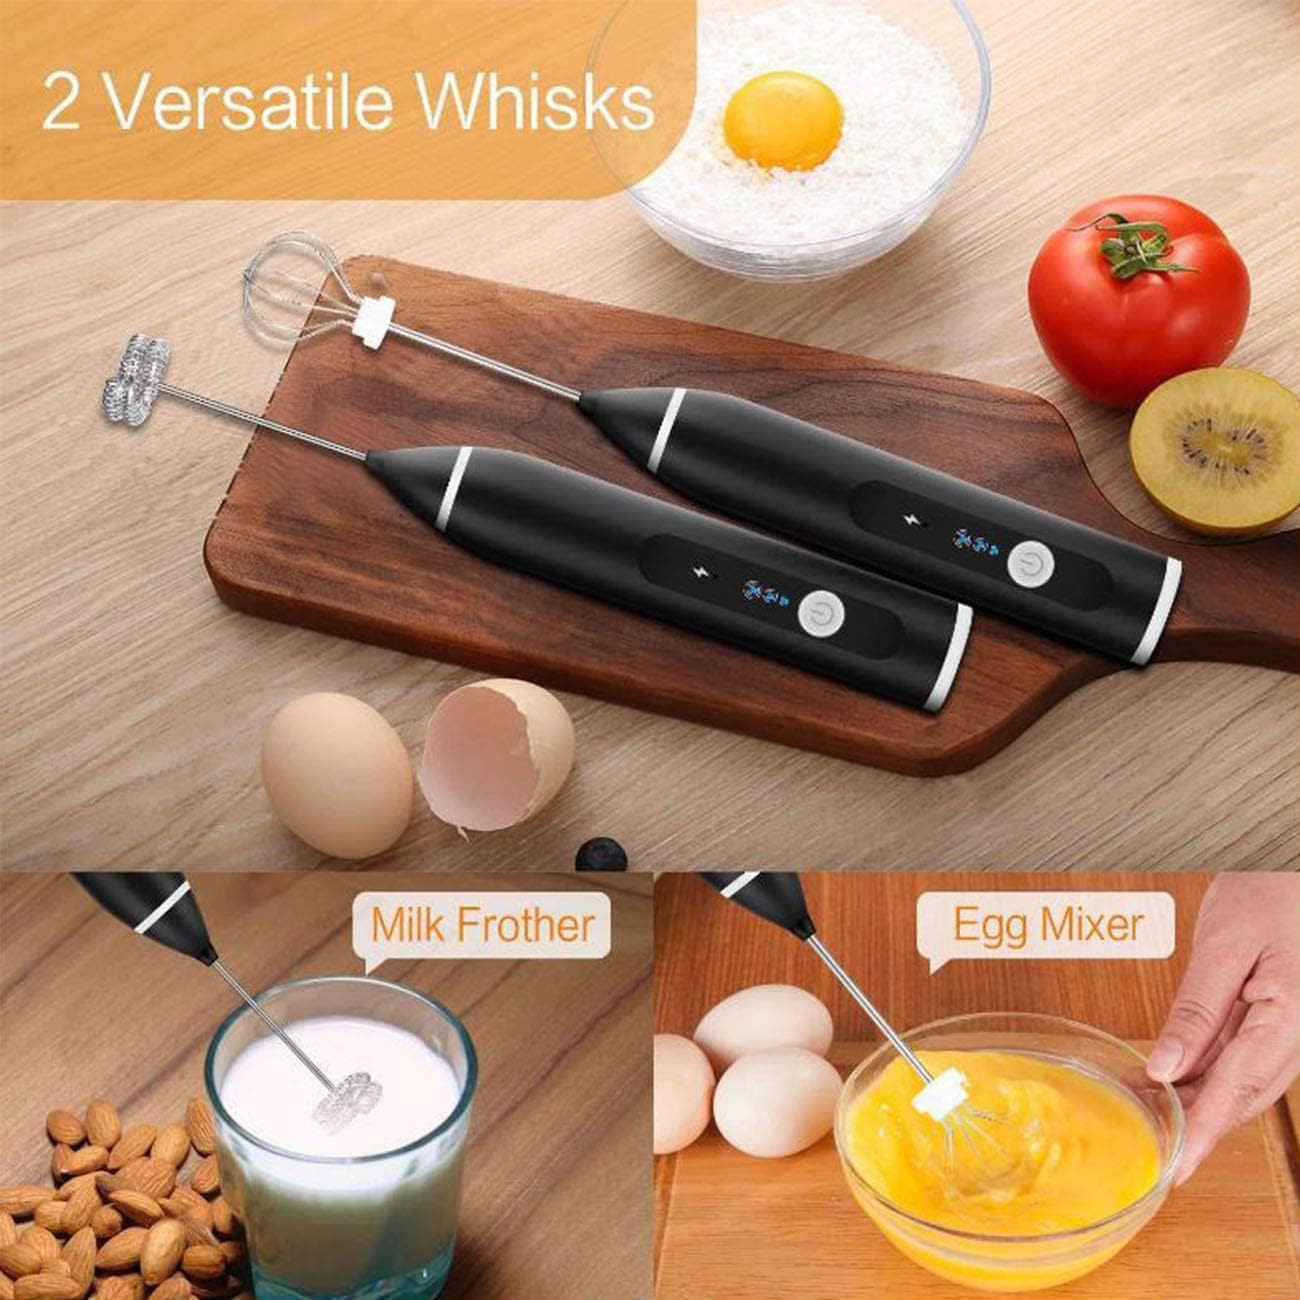 VIO Milk Frother Handheld, Rechargeable Electric Mixer for Coffee Drink, Foam Bread Maker, 3 Speed Adjustable Hand Held Mixer for Mini Whisk, Cappuccino Latte Hot Chocolate